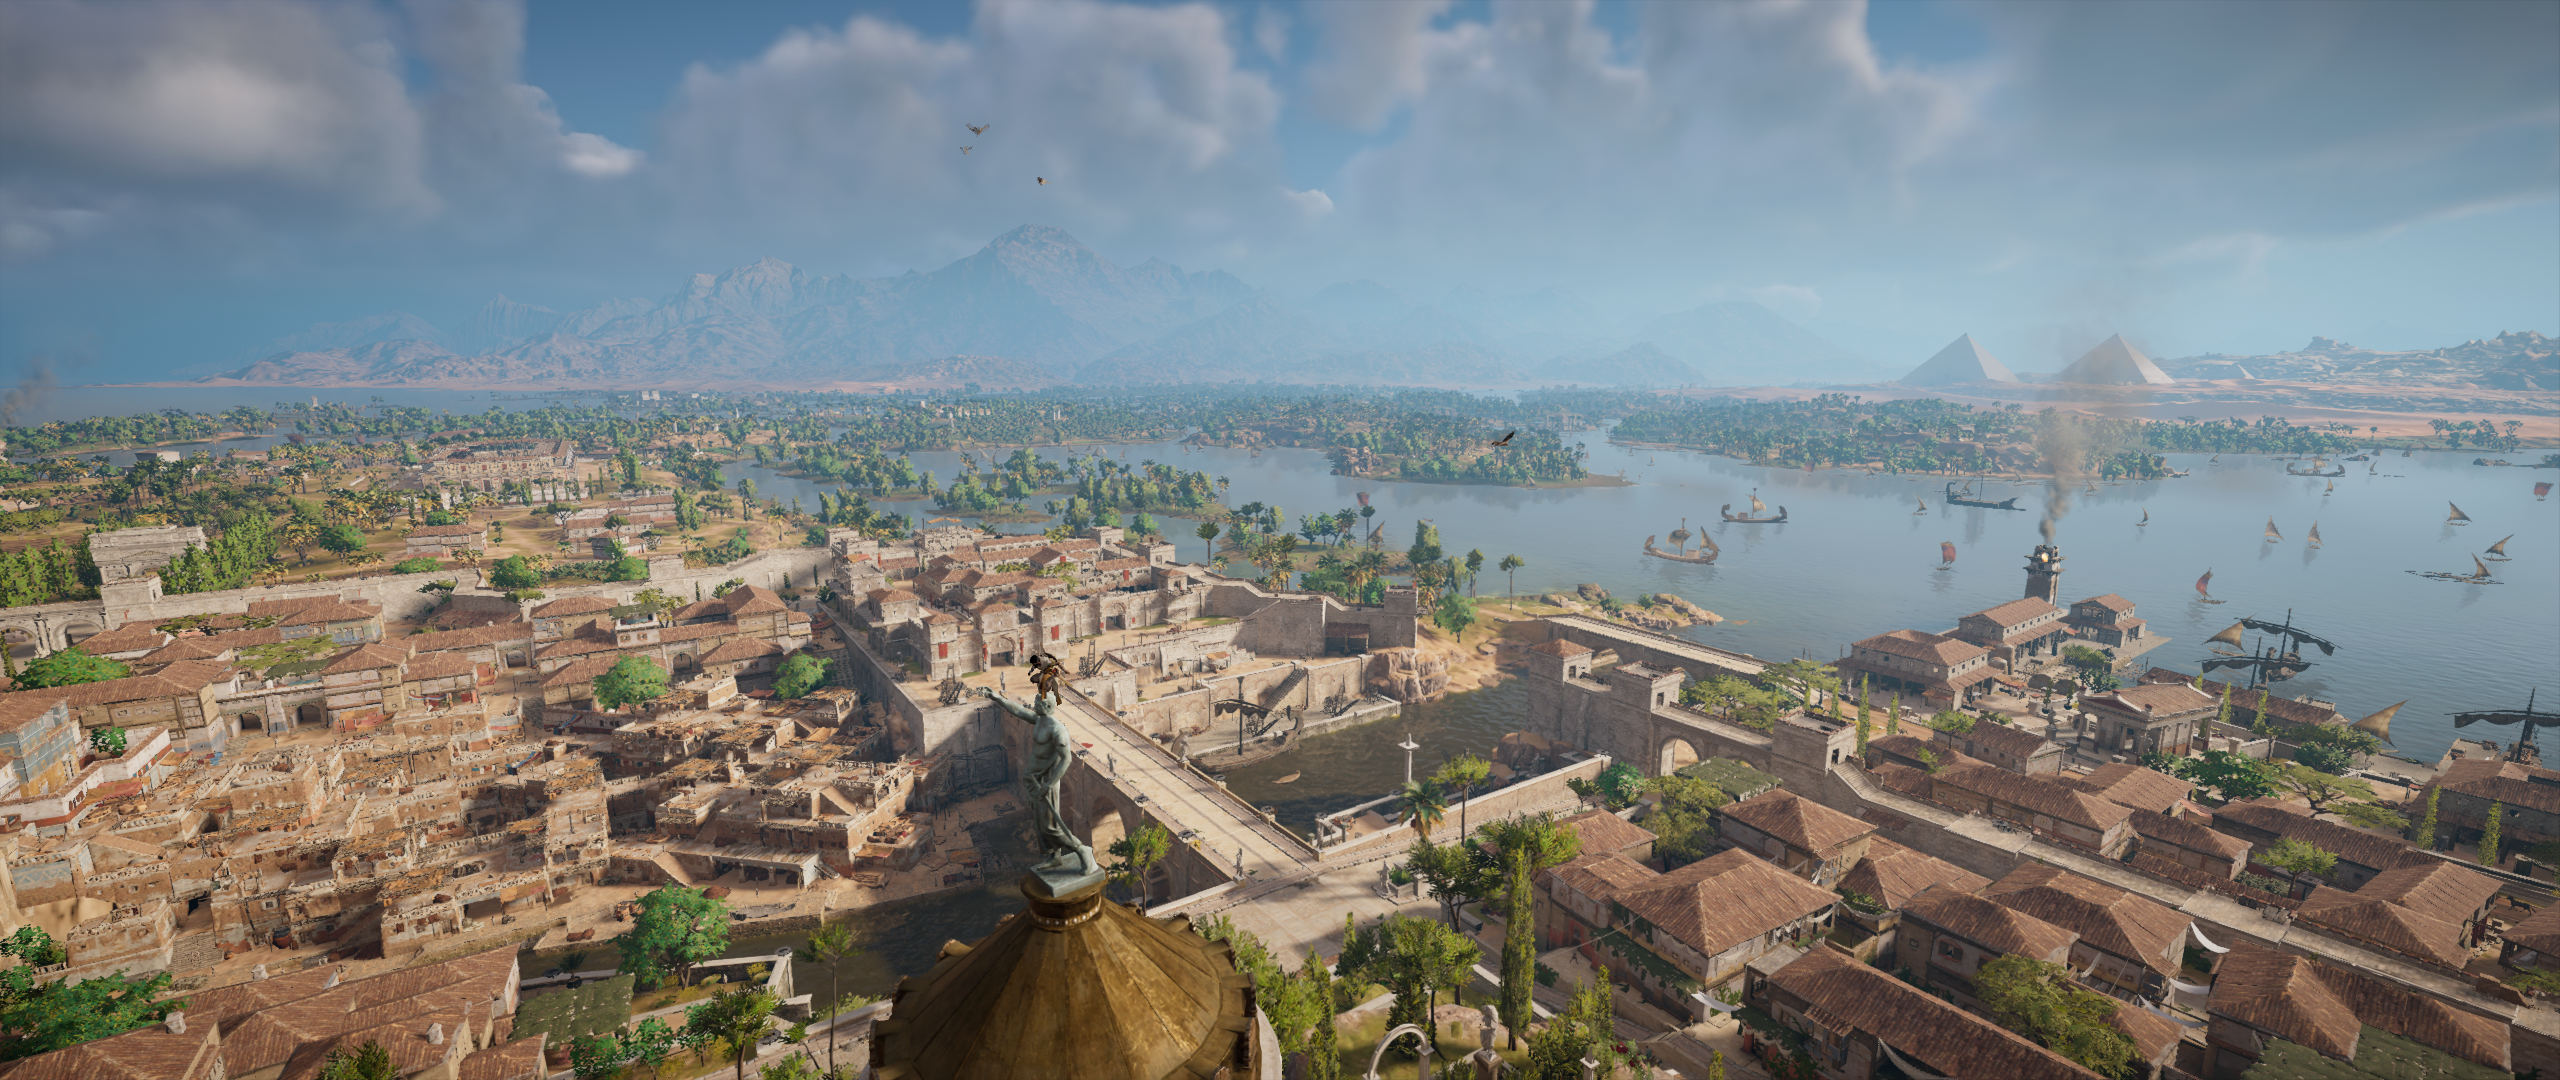 General 2560x1080 Assassin's Creed Assassin's Creed: Origins Bayek landscape Egypt Pyramids of Giza horizon video games PC gaming cityscape